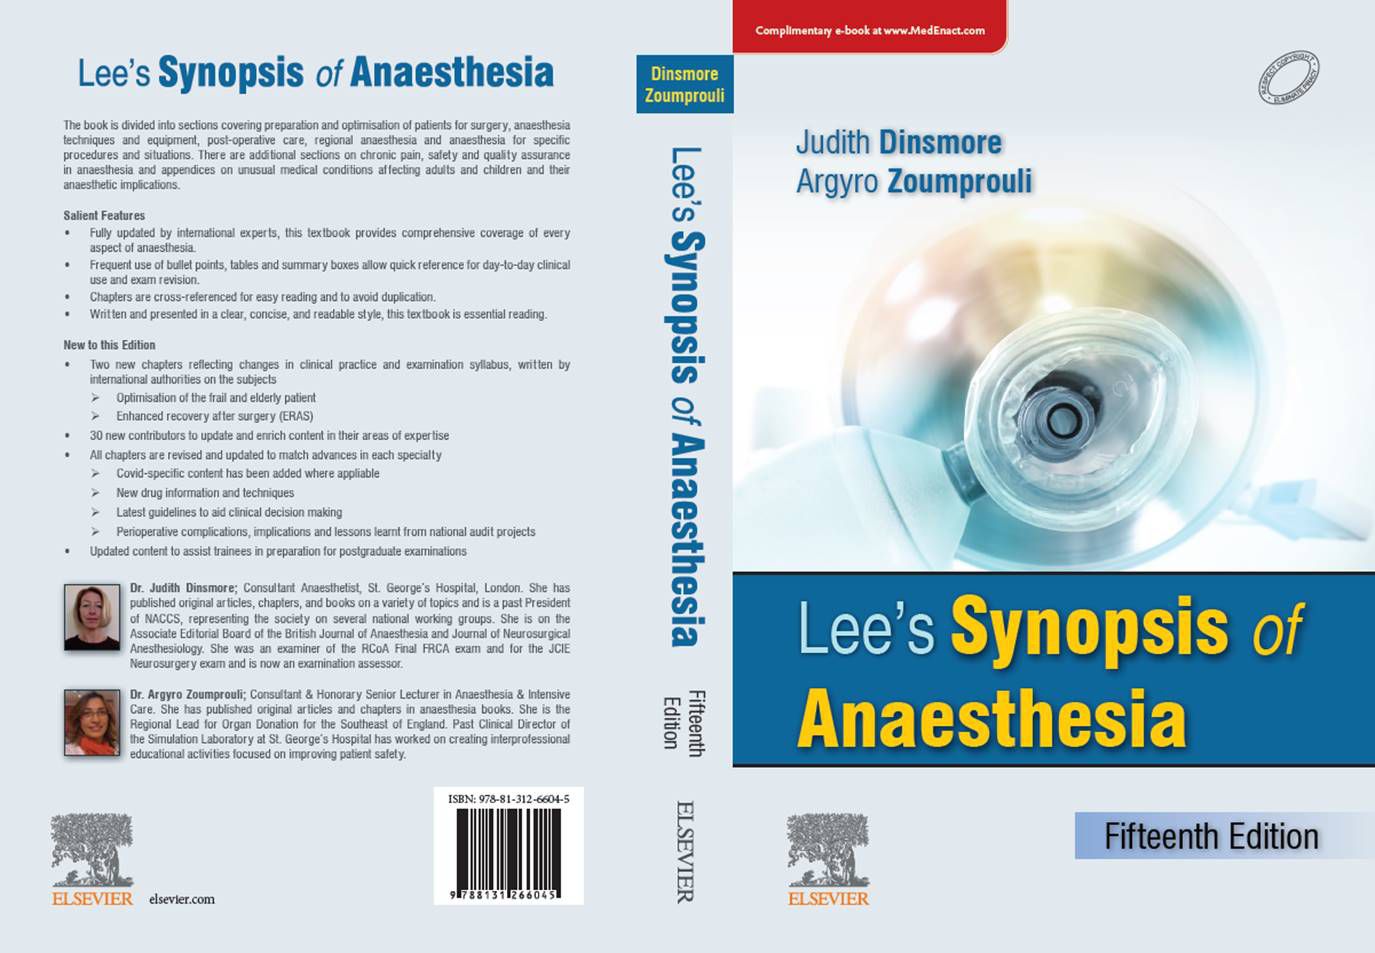 Lee's Synopsis of Anaesthesia 15th Edition